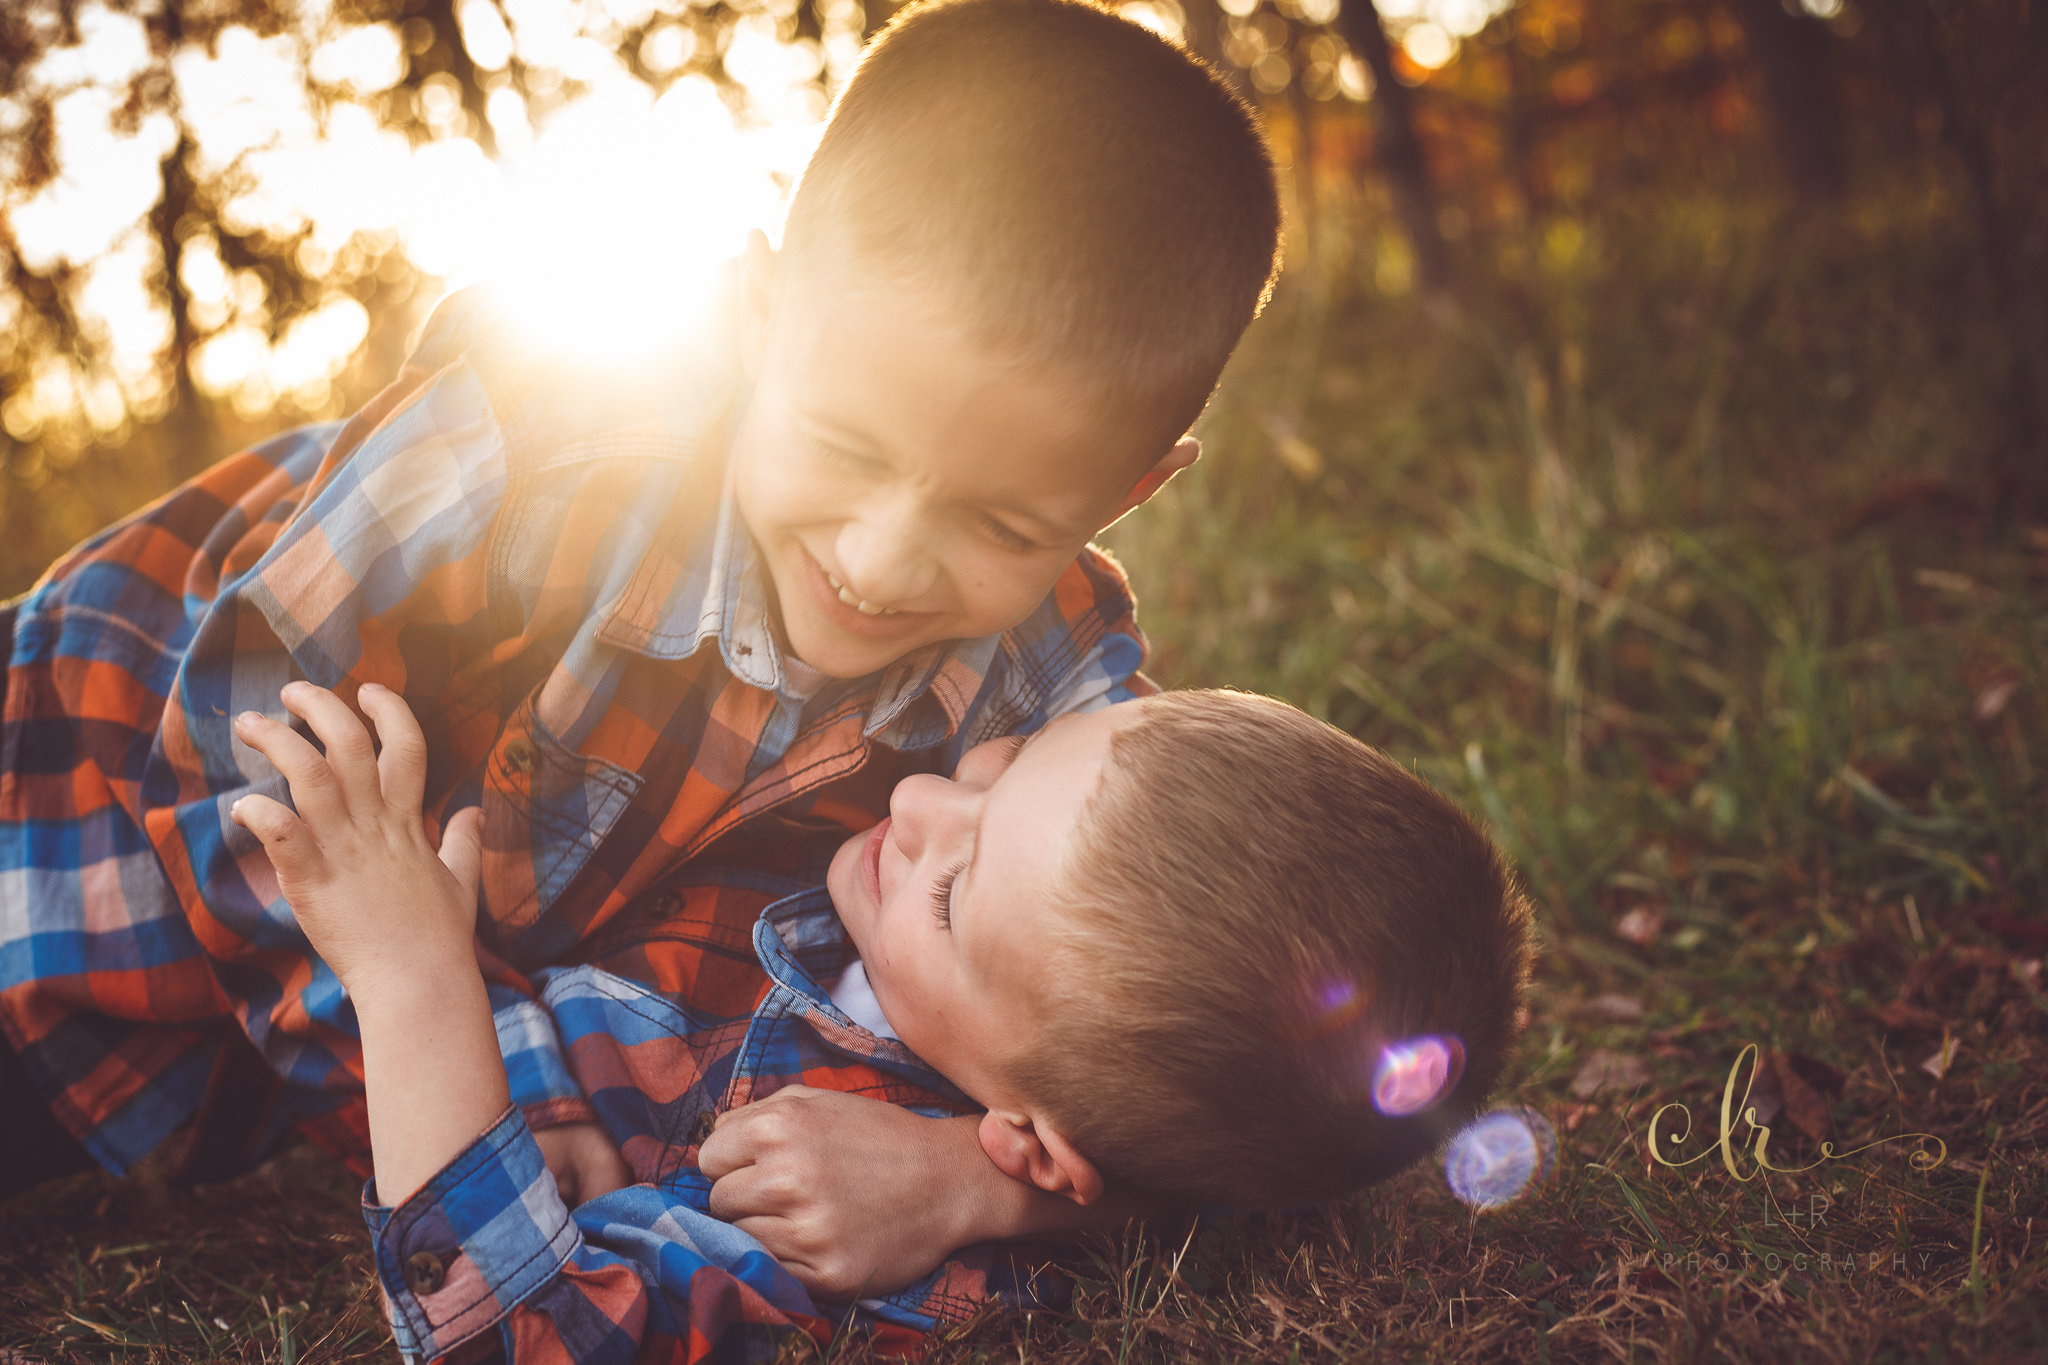 Two young brothers enjoy a moment, wrestling on the ground and laughing during this sunset family photography session by L&R Photography